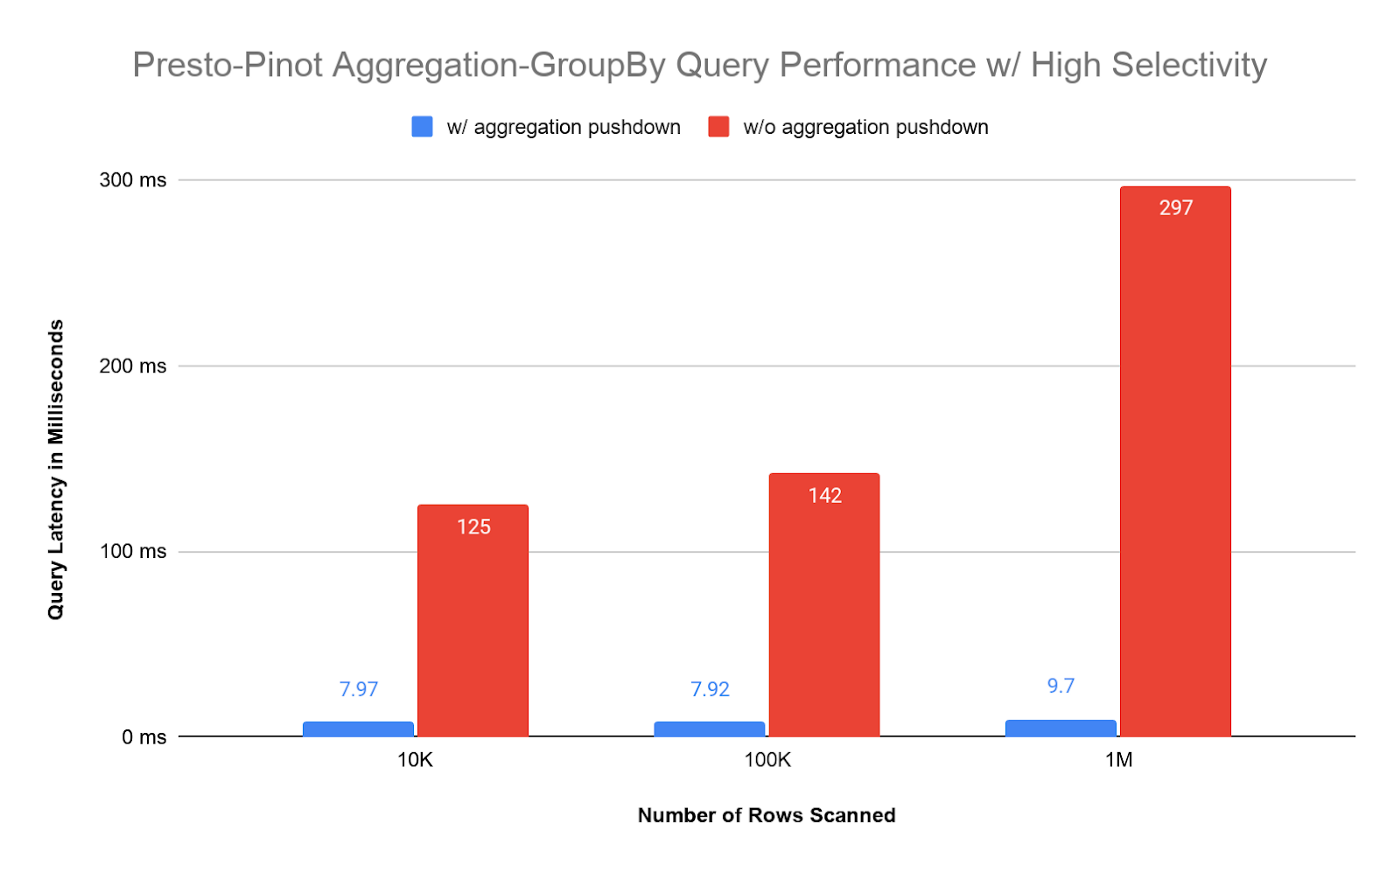 Presto Pinot aggregation group by query performance with high selectivity